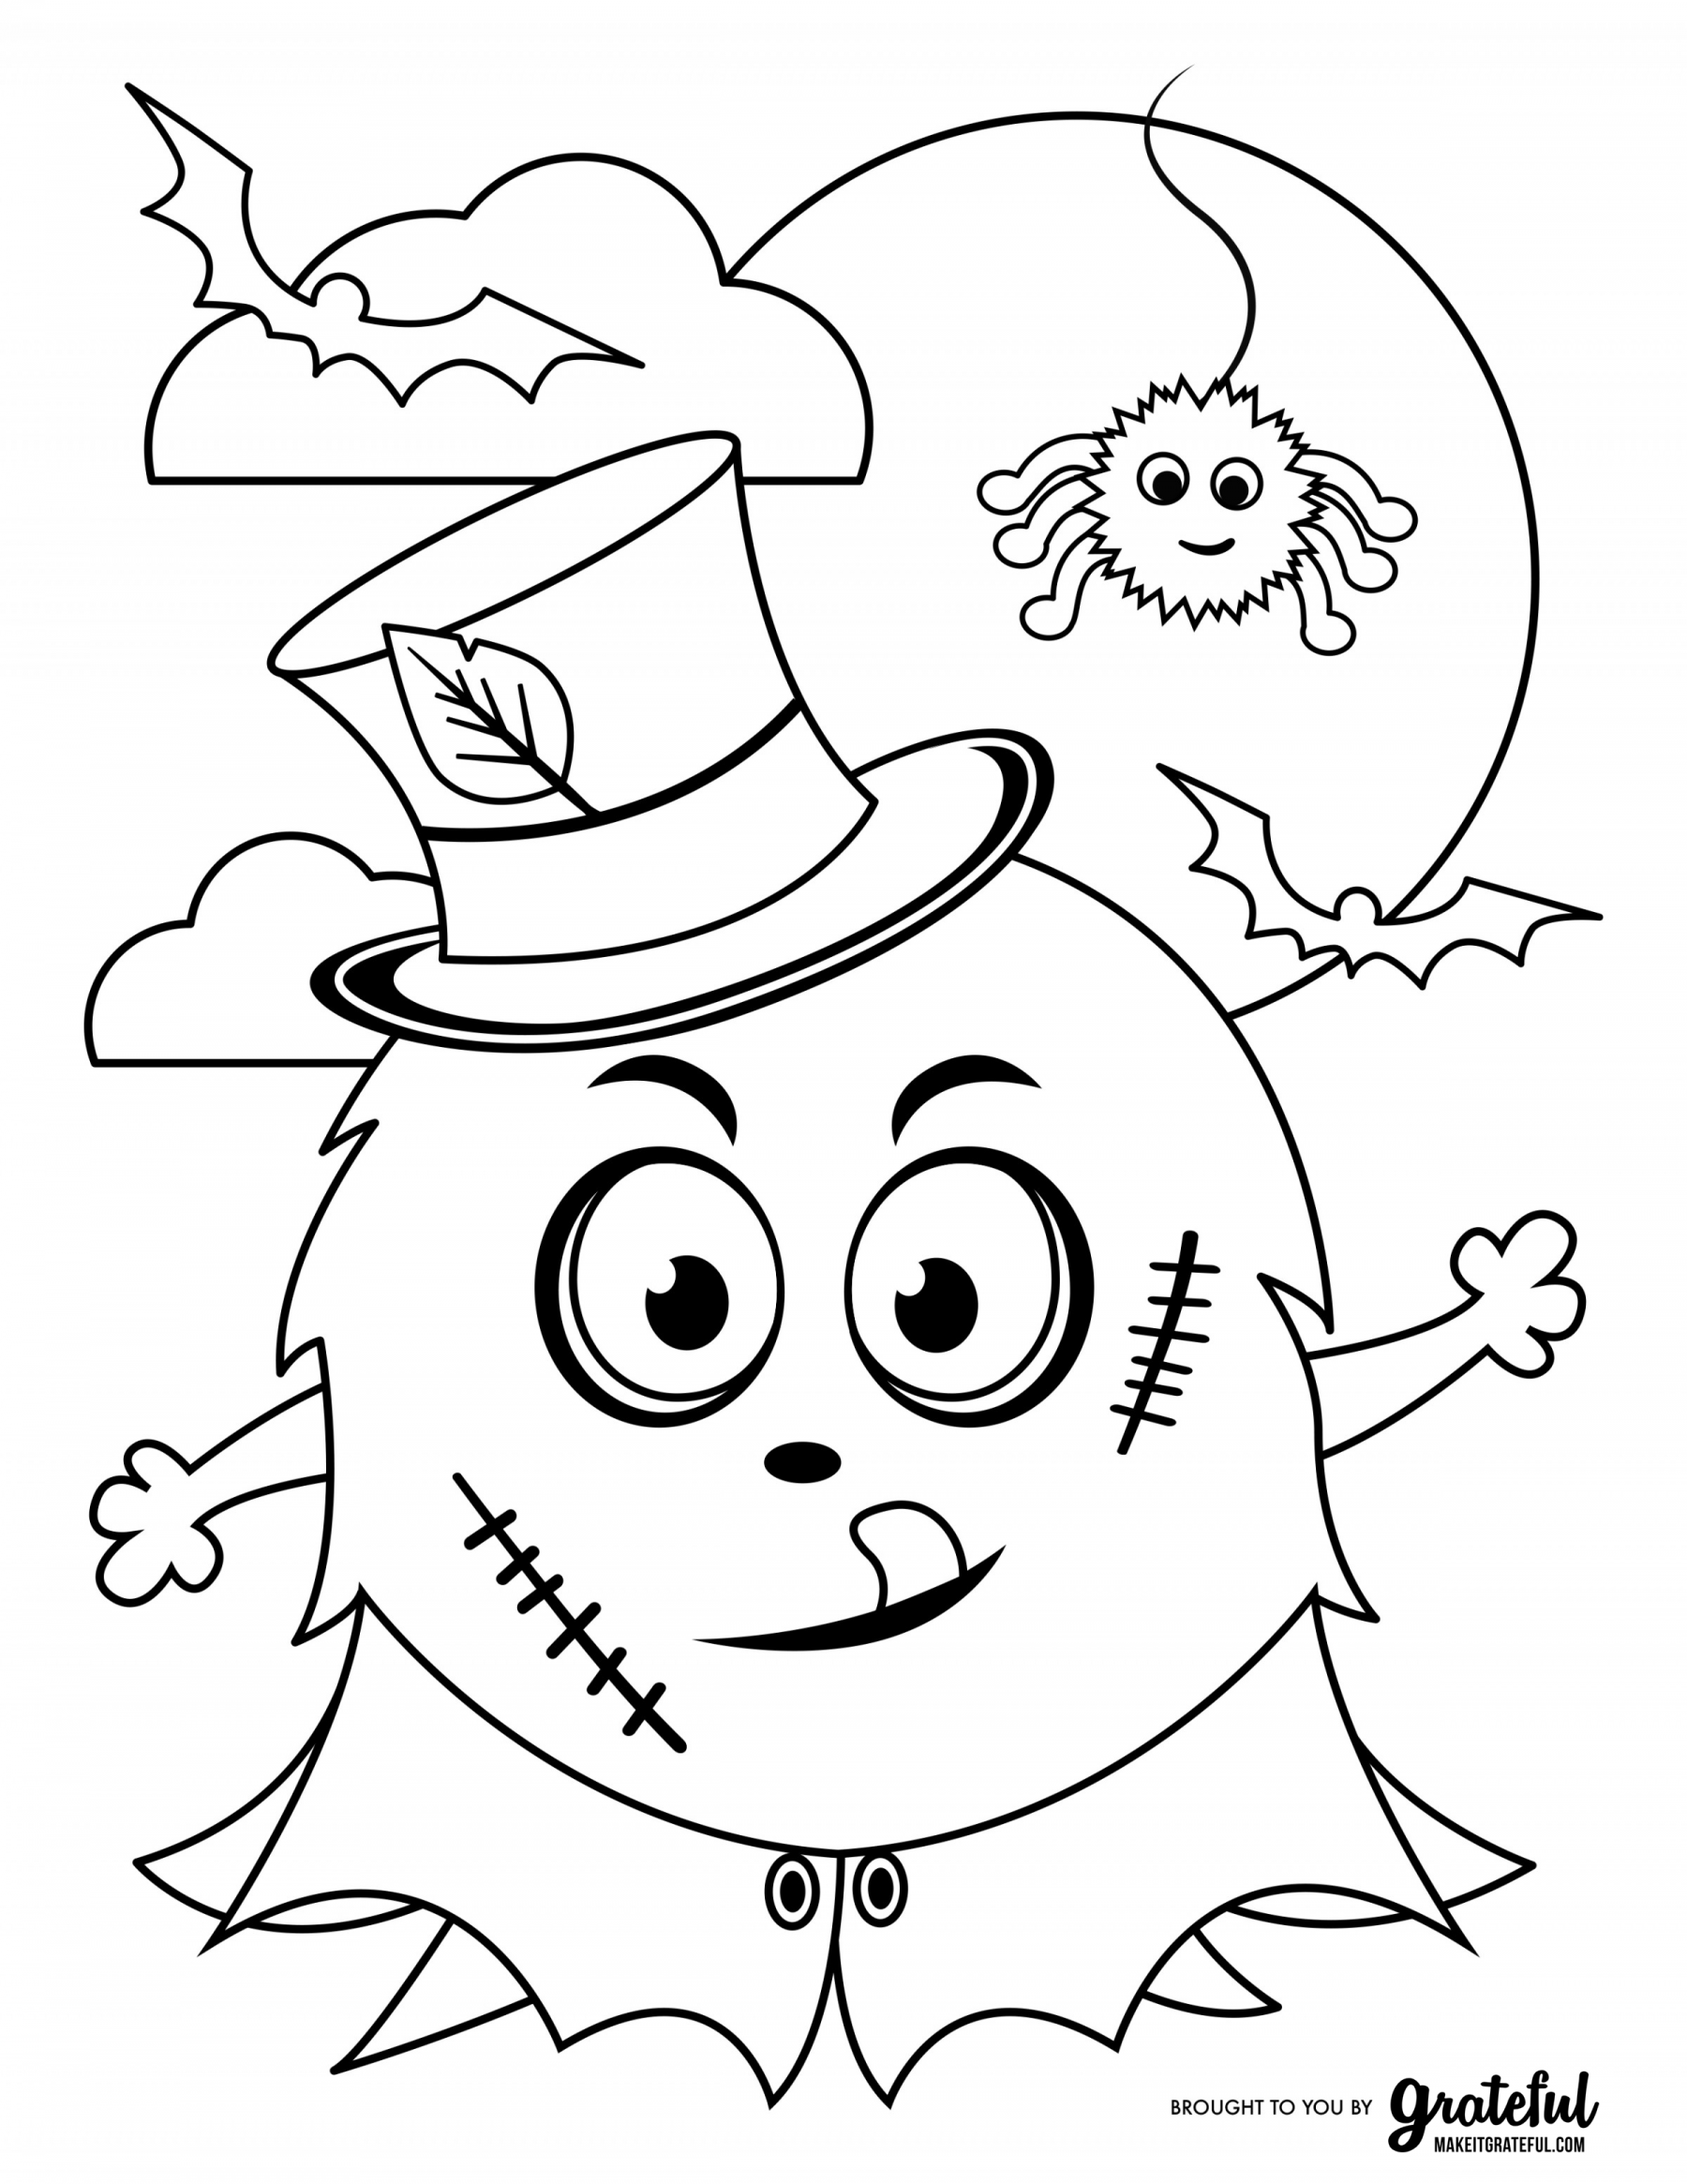 Free Halloween Coloring Pages Coloring Pages